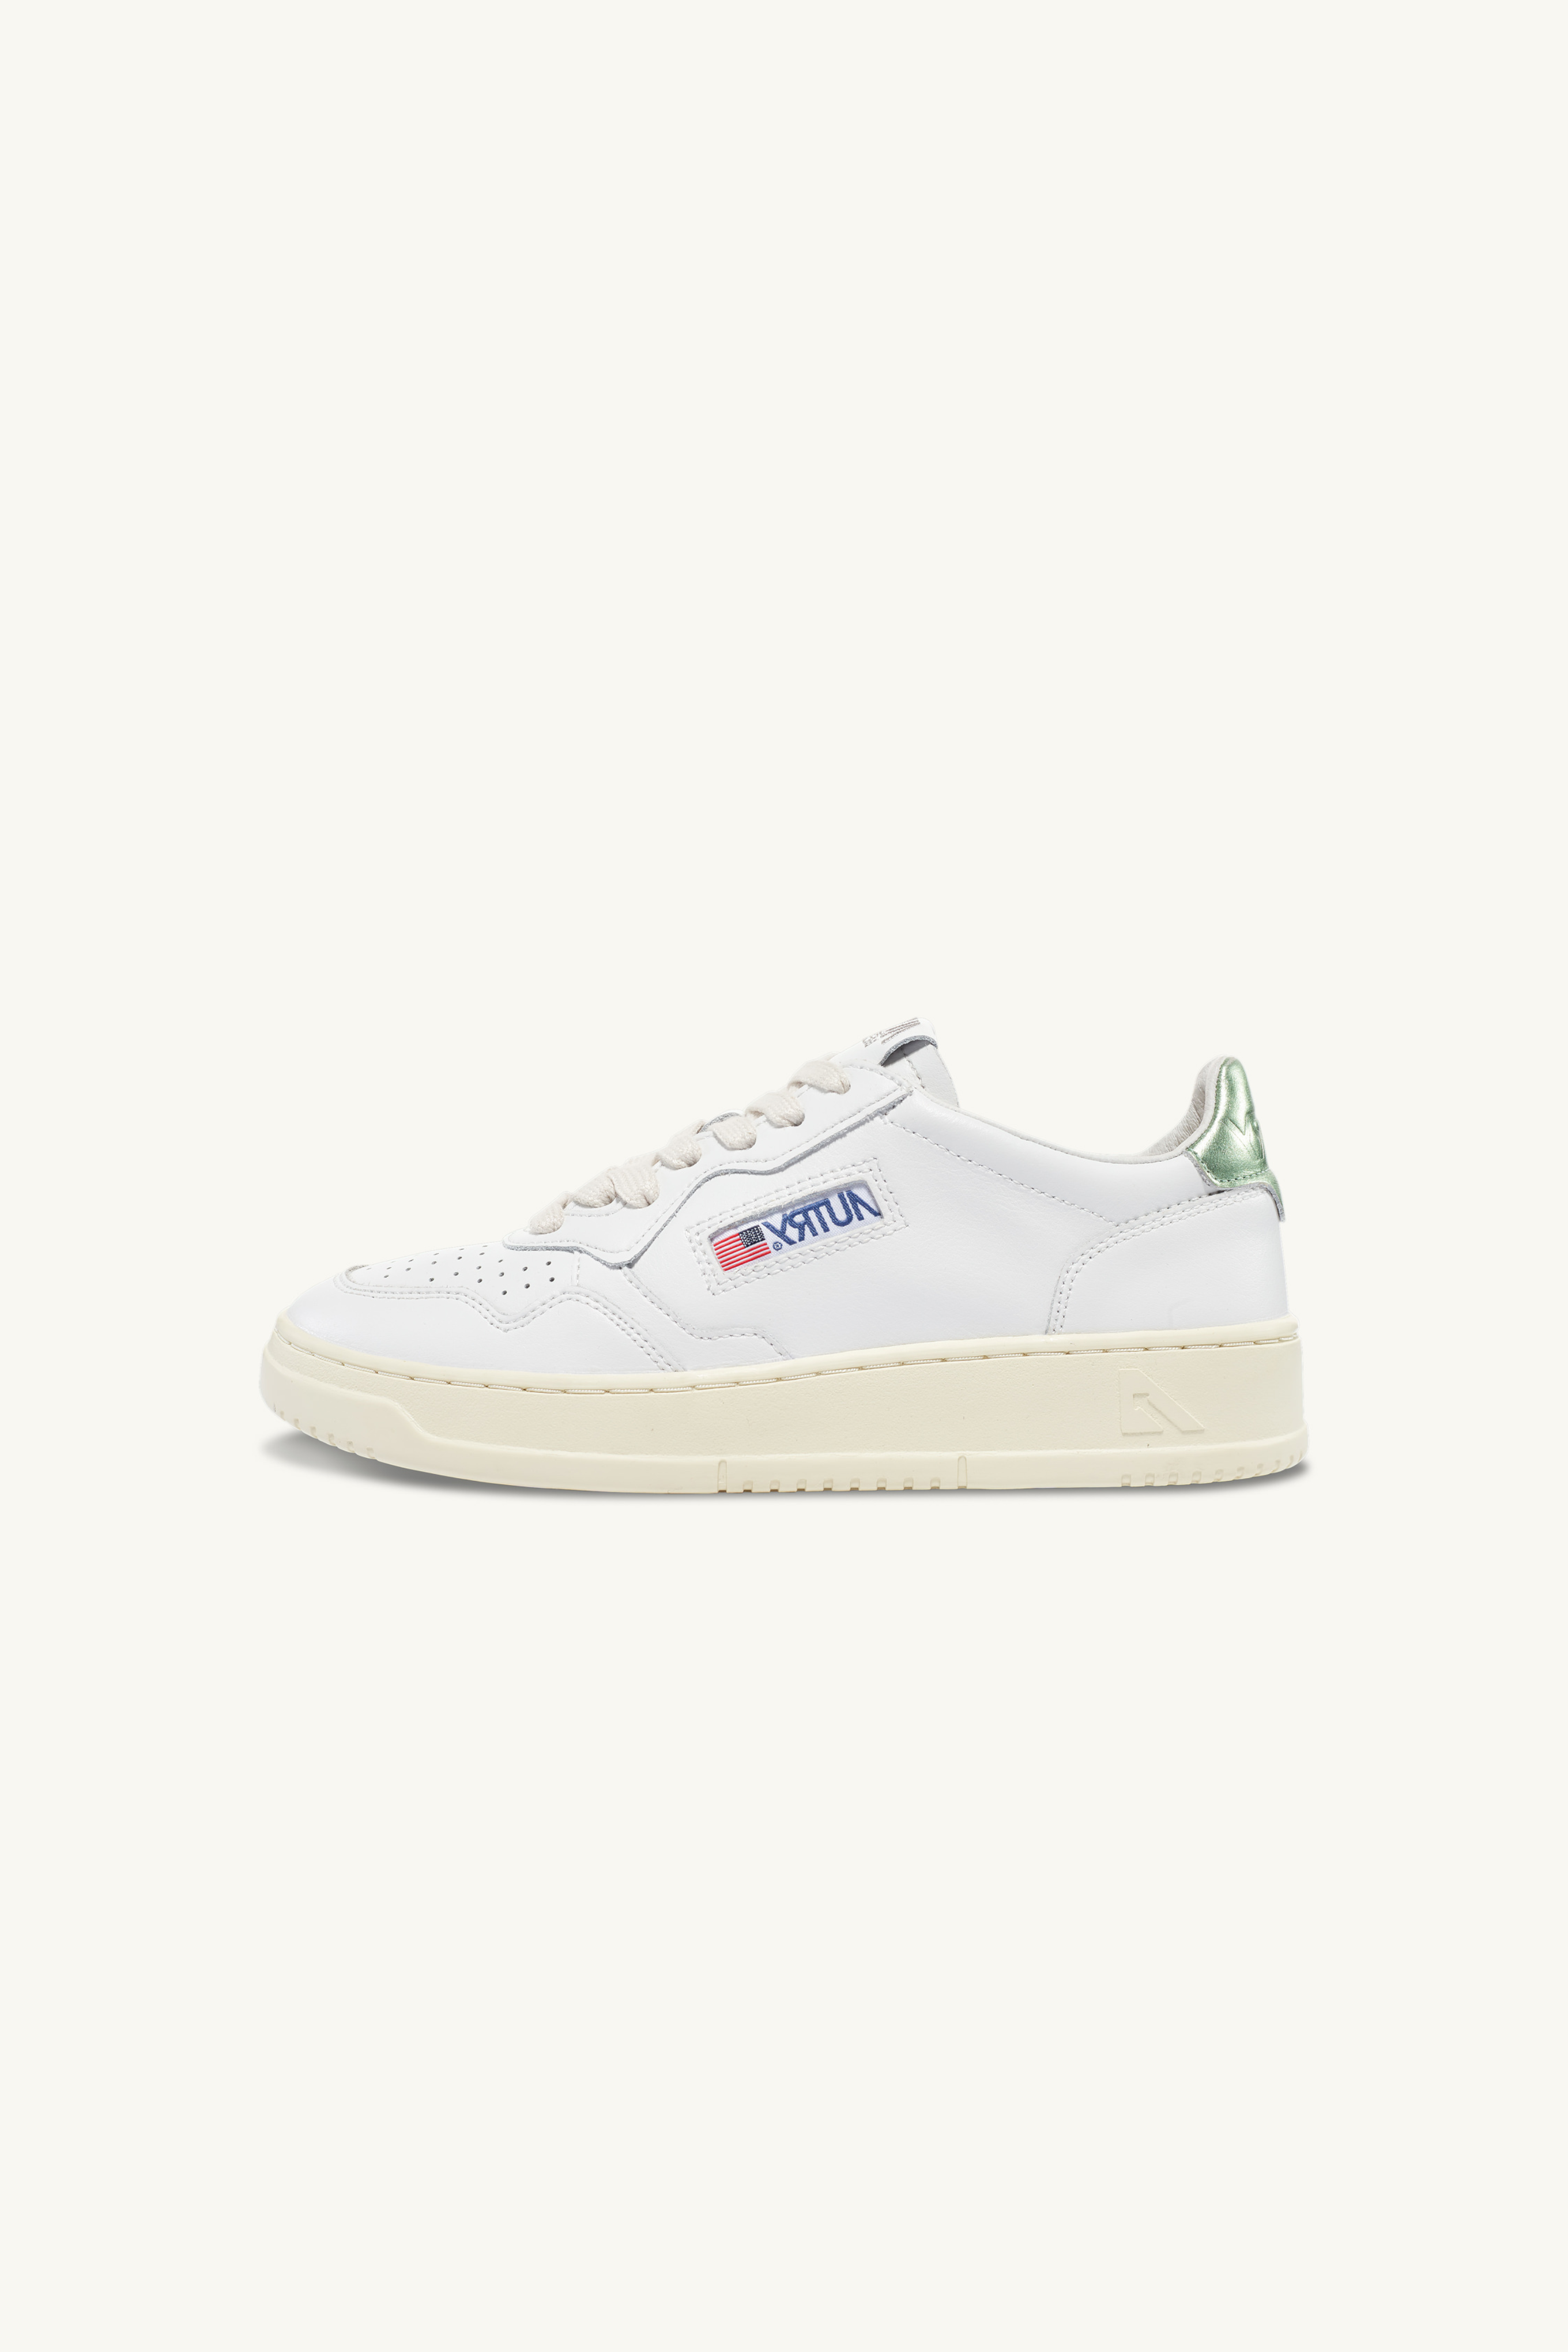 AULW-LL62 - MEDALIST LOW SNEAKERS IN LEATHER WHITE AND PASTEL GREEN